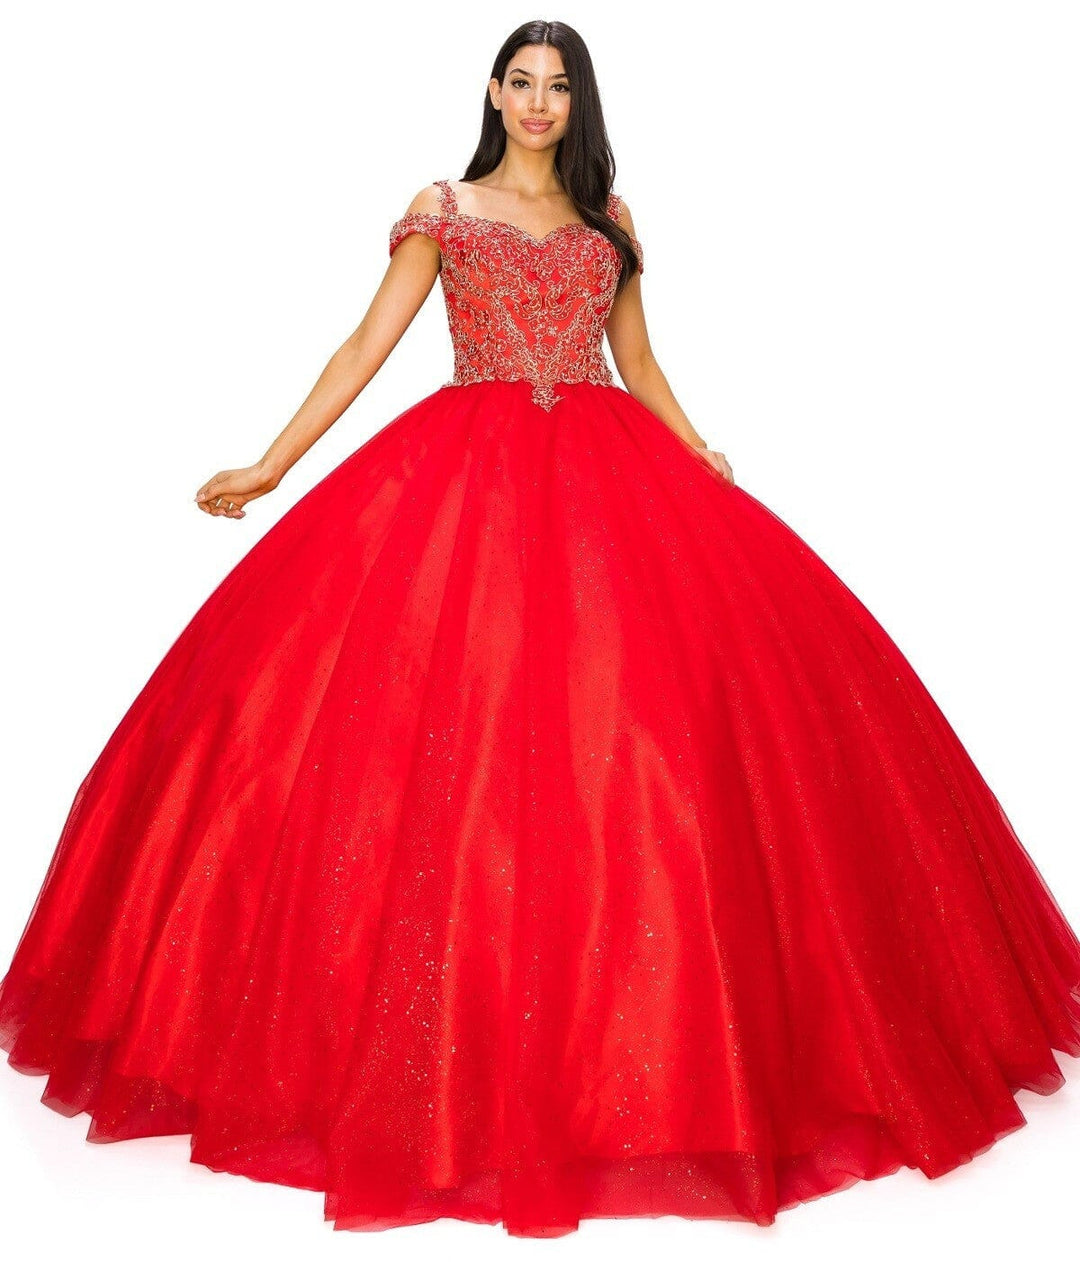 Applique Cold Shoulder Ball Gown by Cinderella Couture 8028J